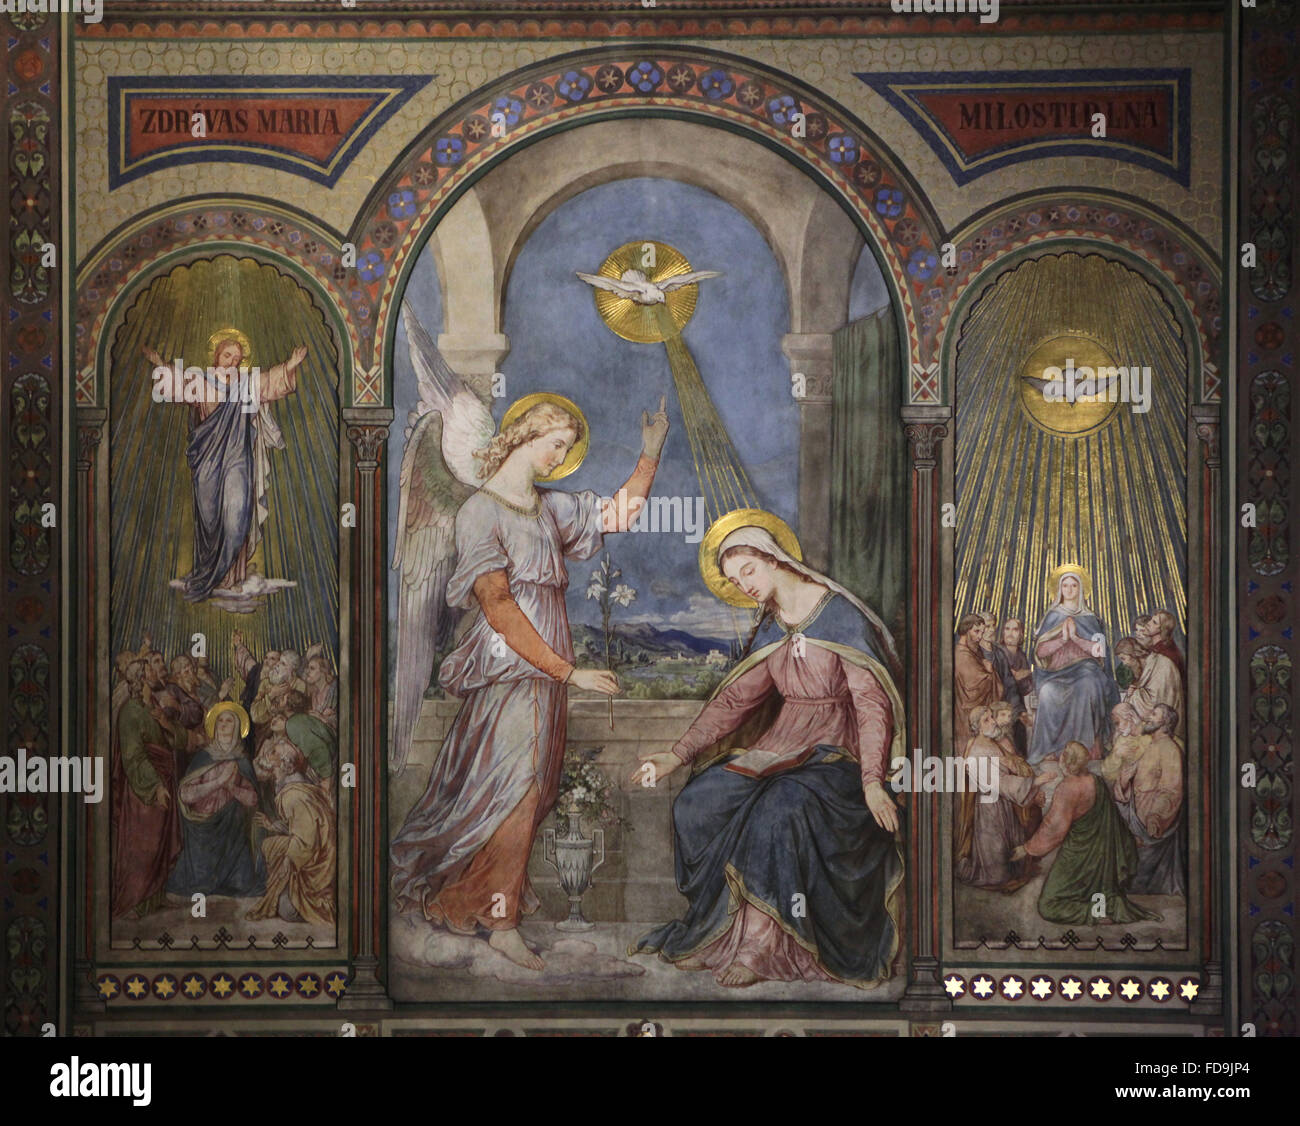 Annunciation. Mural painting (1868) by Czech artist Petr Maixner in the Church of Saints Cyril and Methodius on Karlinske square in Karlin district in Prague, Czech Republic. Ascension of Jesus (L) and the Pentecost (R) are depicted on each side. Stock Photo